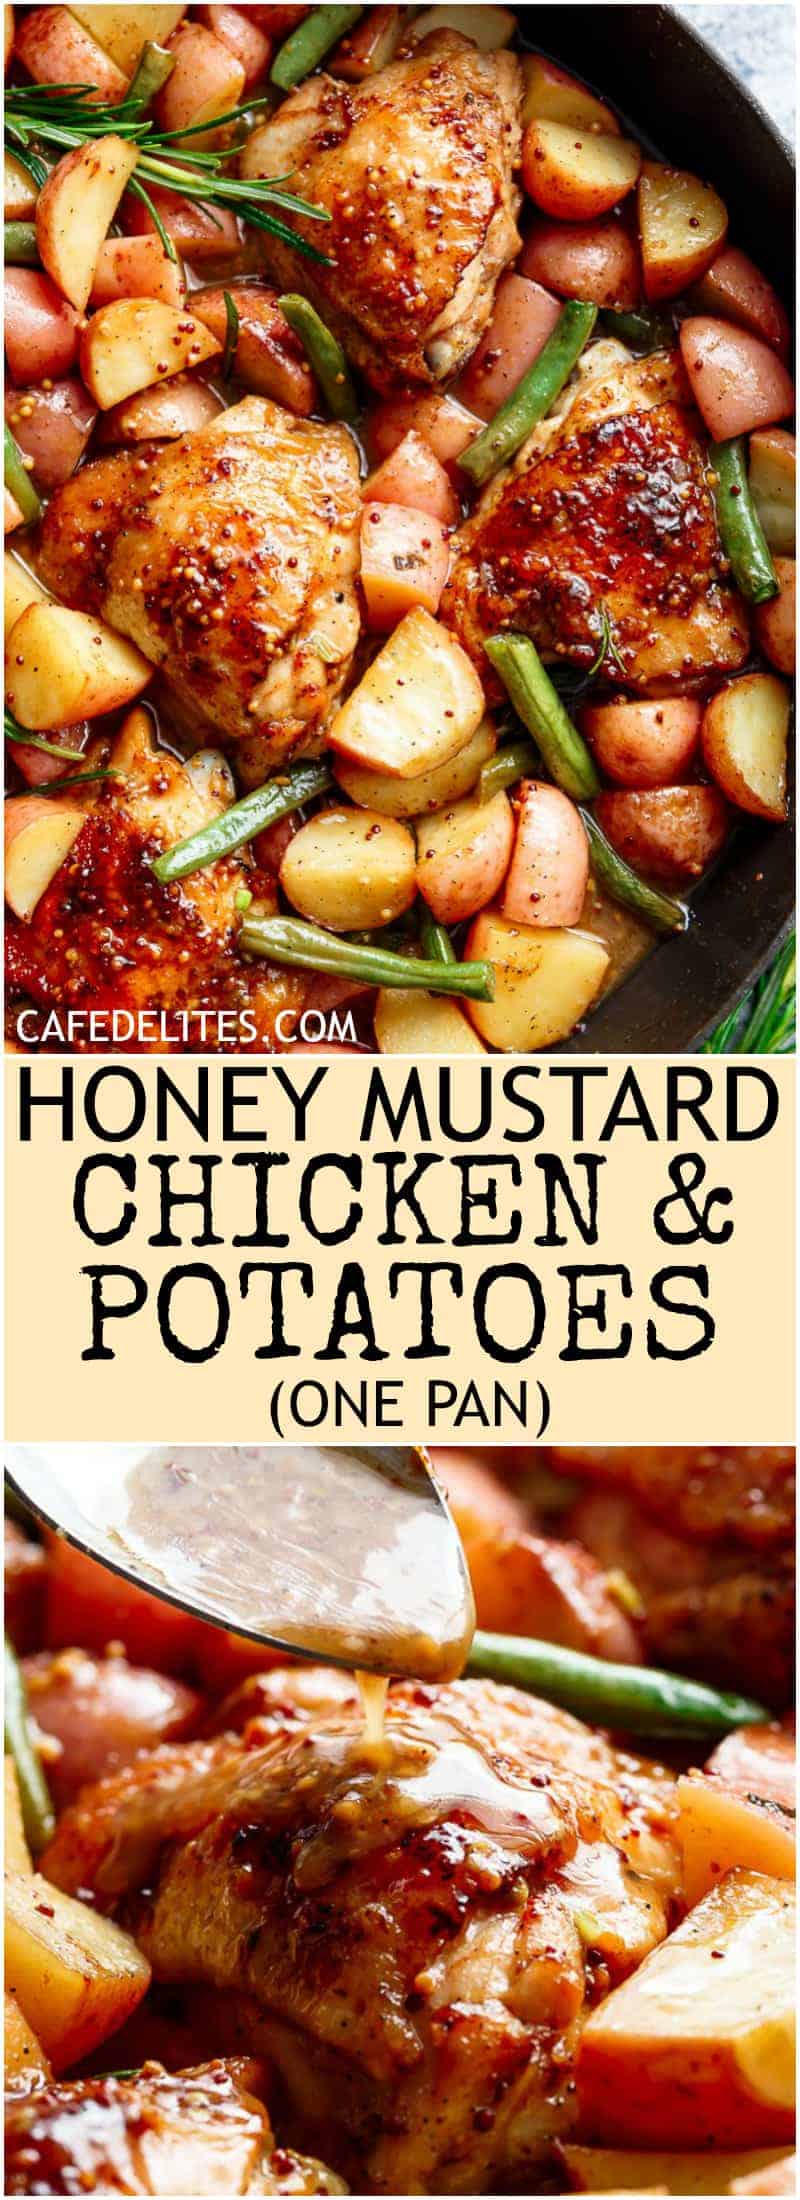 Honey Mustard Chicken & Potatoes is all made in one pan! Juicy, succulent chicken pieces are cooked in the best honey mustard sauce, surrounded by green beans and potatoes for a complete meal! | https://cafedelites.com